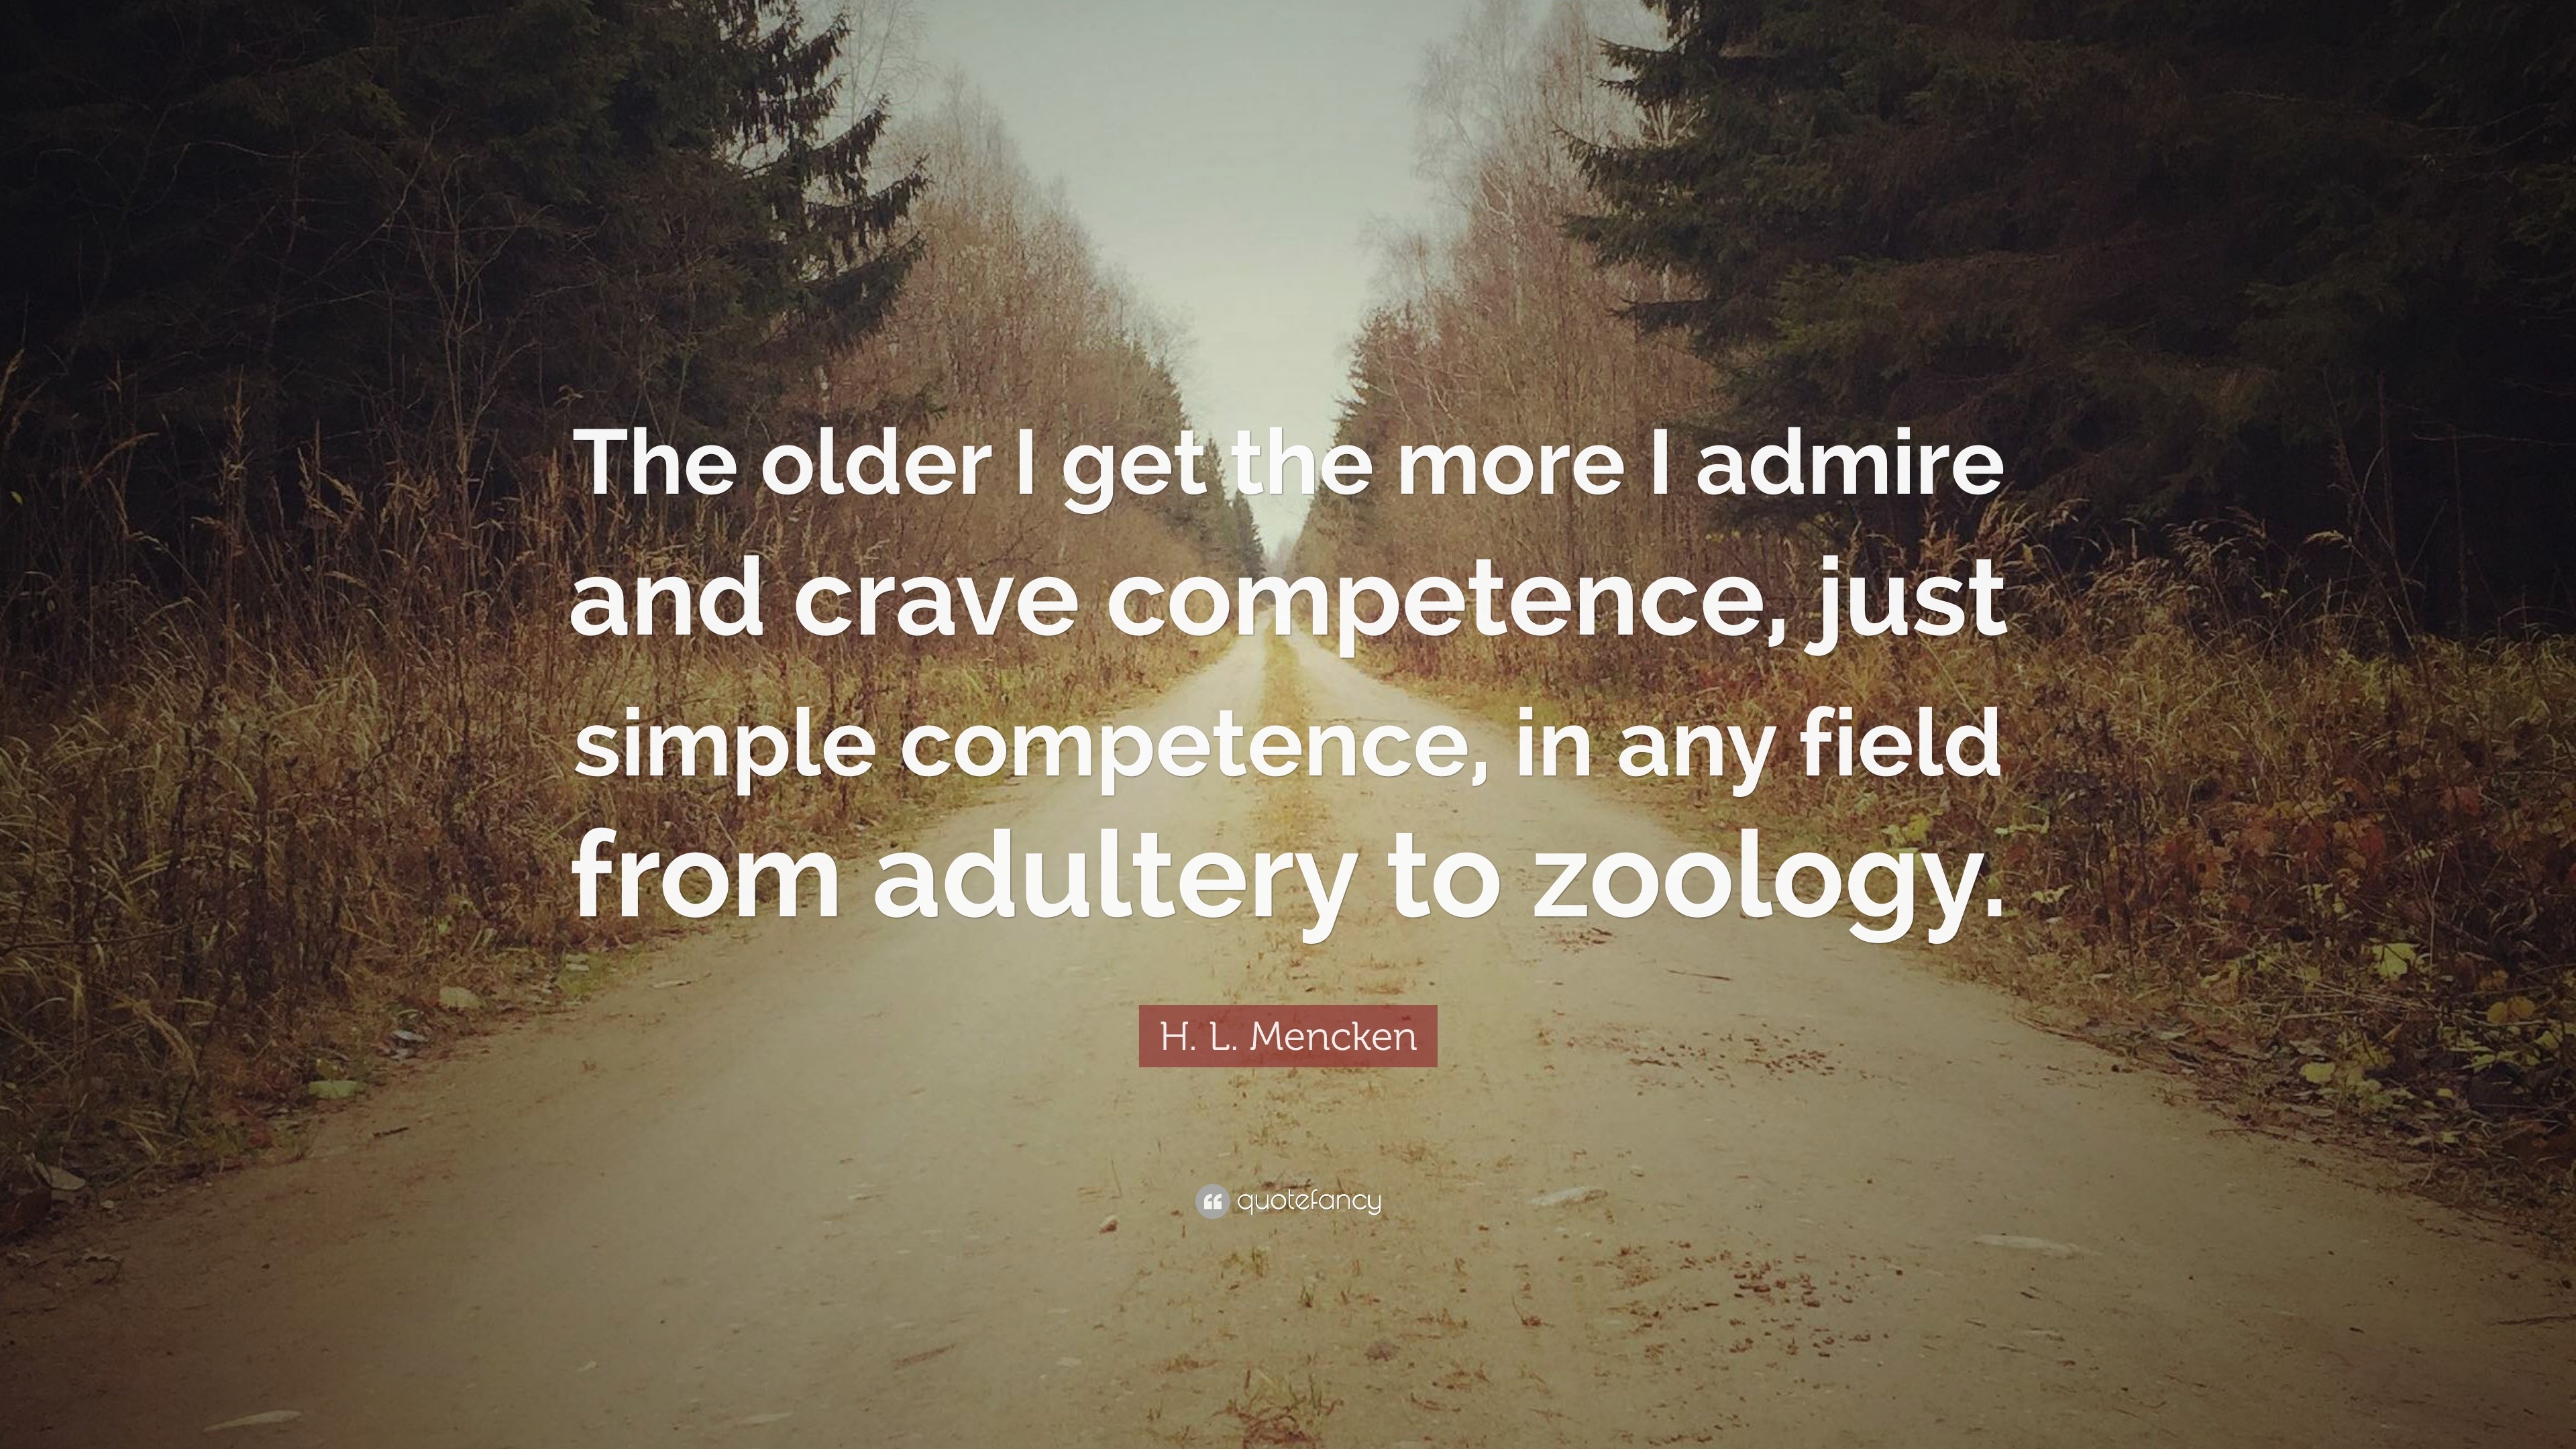 Zoology Quote : Love Zoology Quotes 89 Quotes : 21 copy quote show